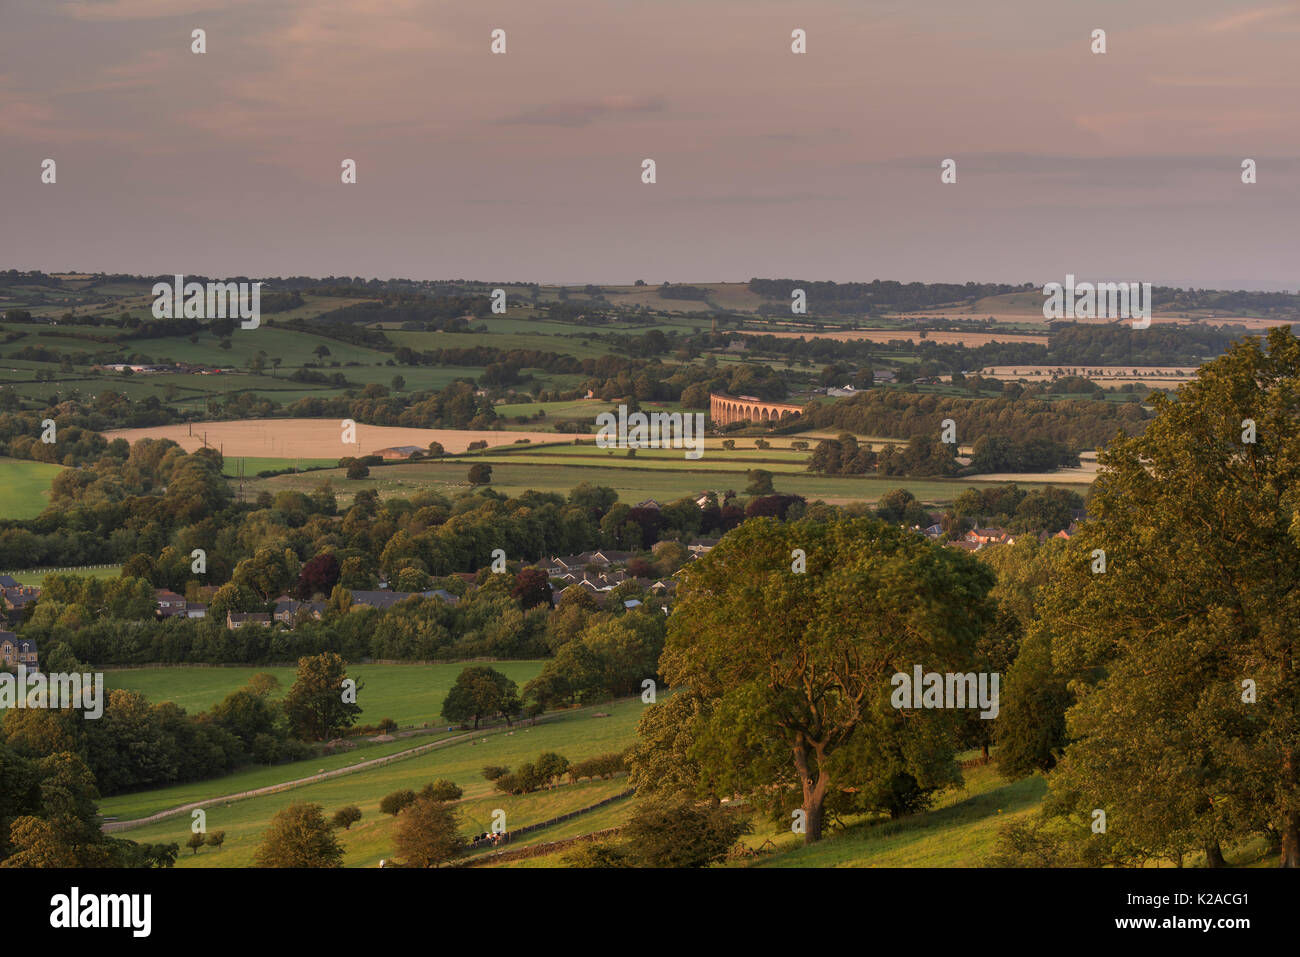 Sunset high view over sunlit Wharfe Valley, with Pool in Wharfedale village & Arthington viaduct in a scenic rural landscape - Yorkshire, England, UK. Stock Photo